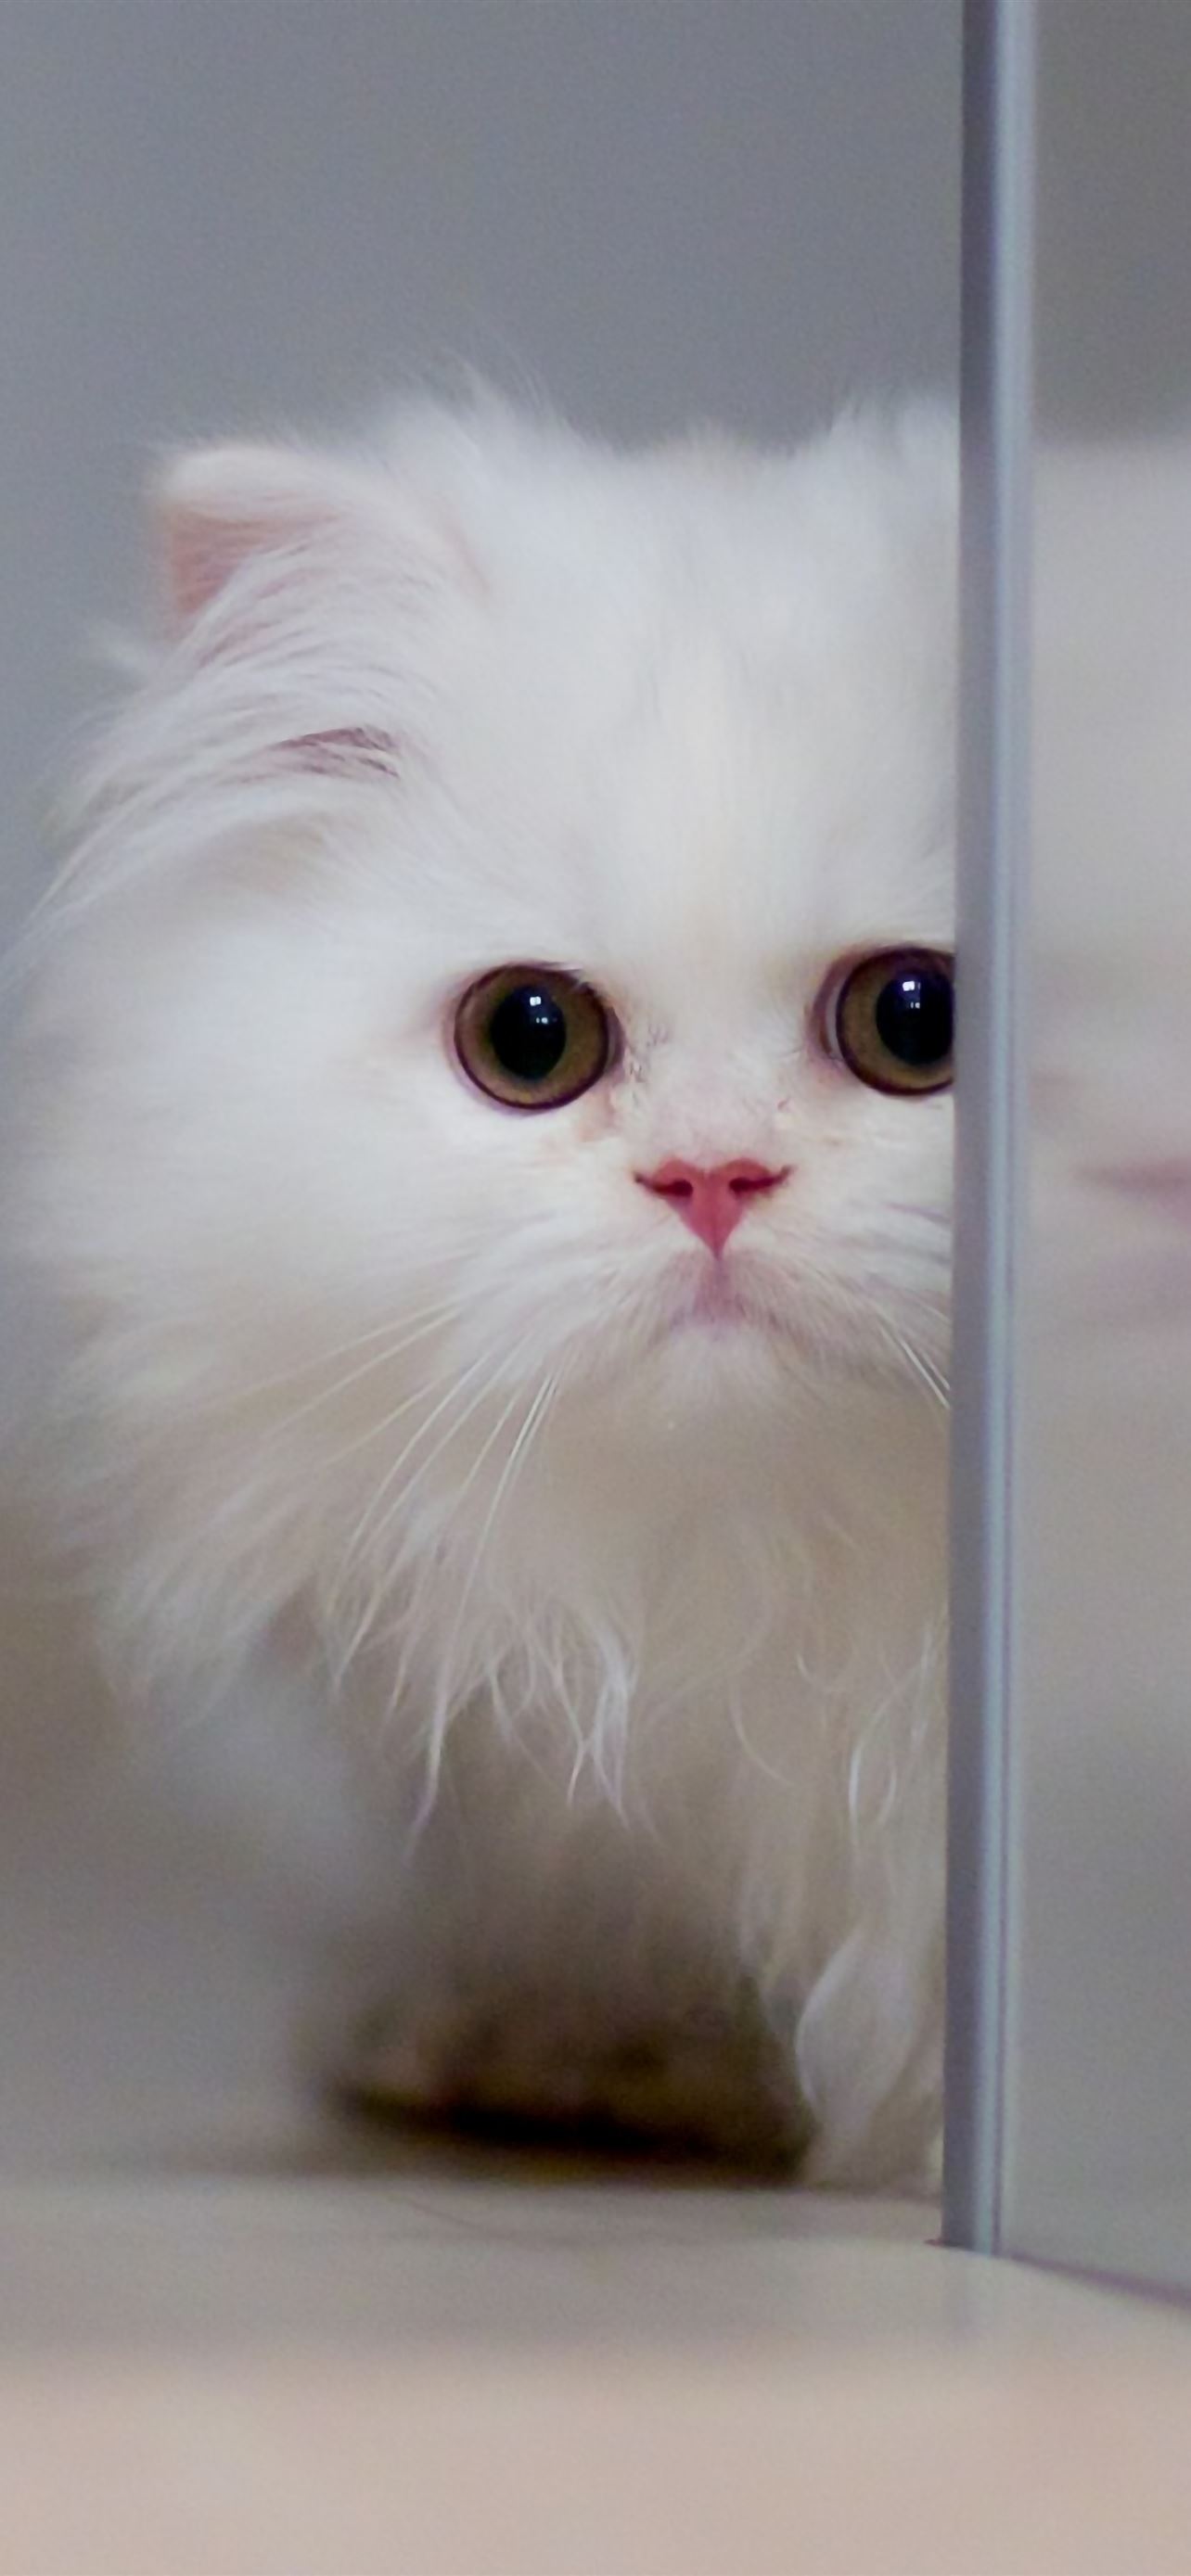 Cute White Cat iPhone Wallpaper Free Download